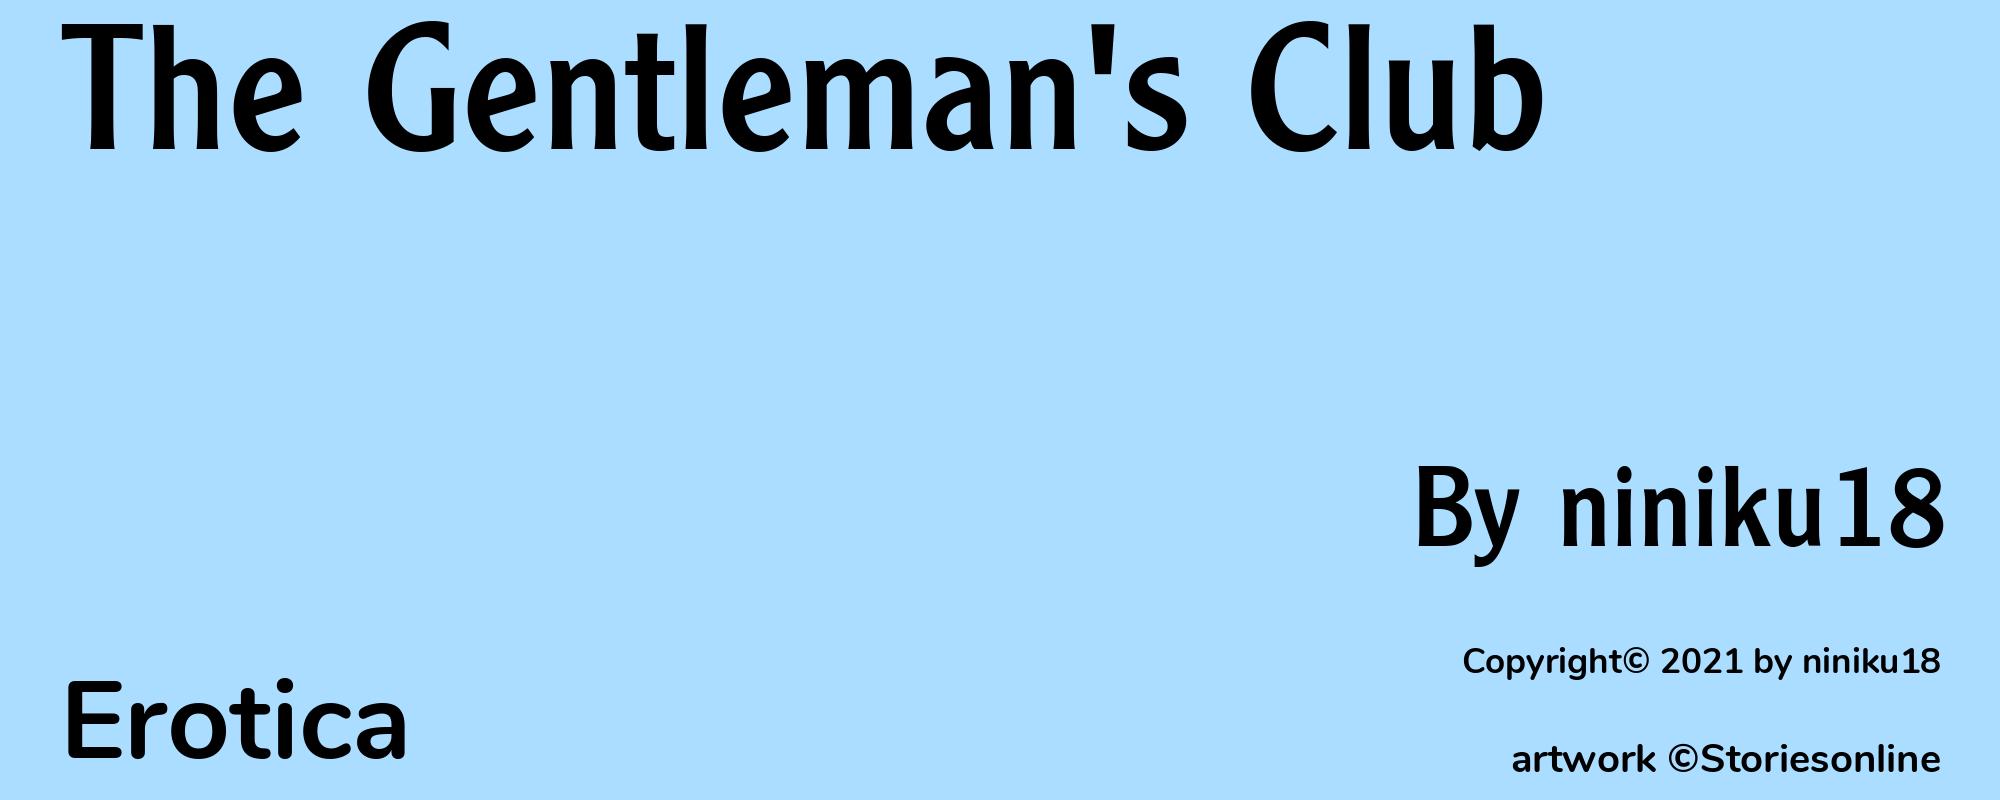 The Gentleman's Club - Cover